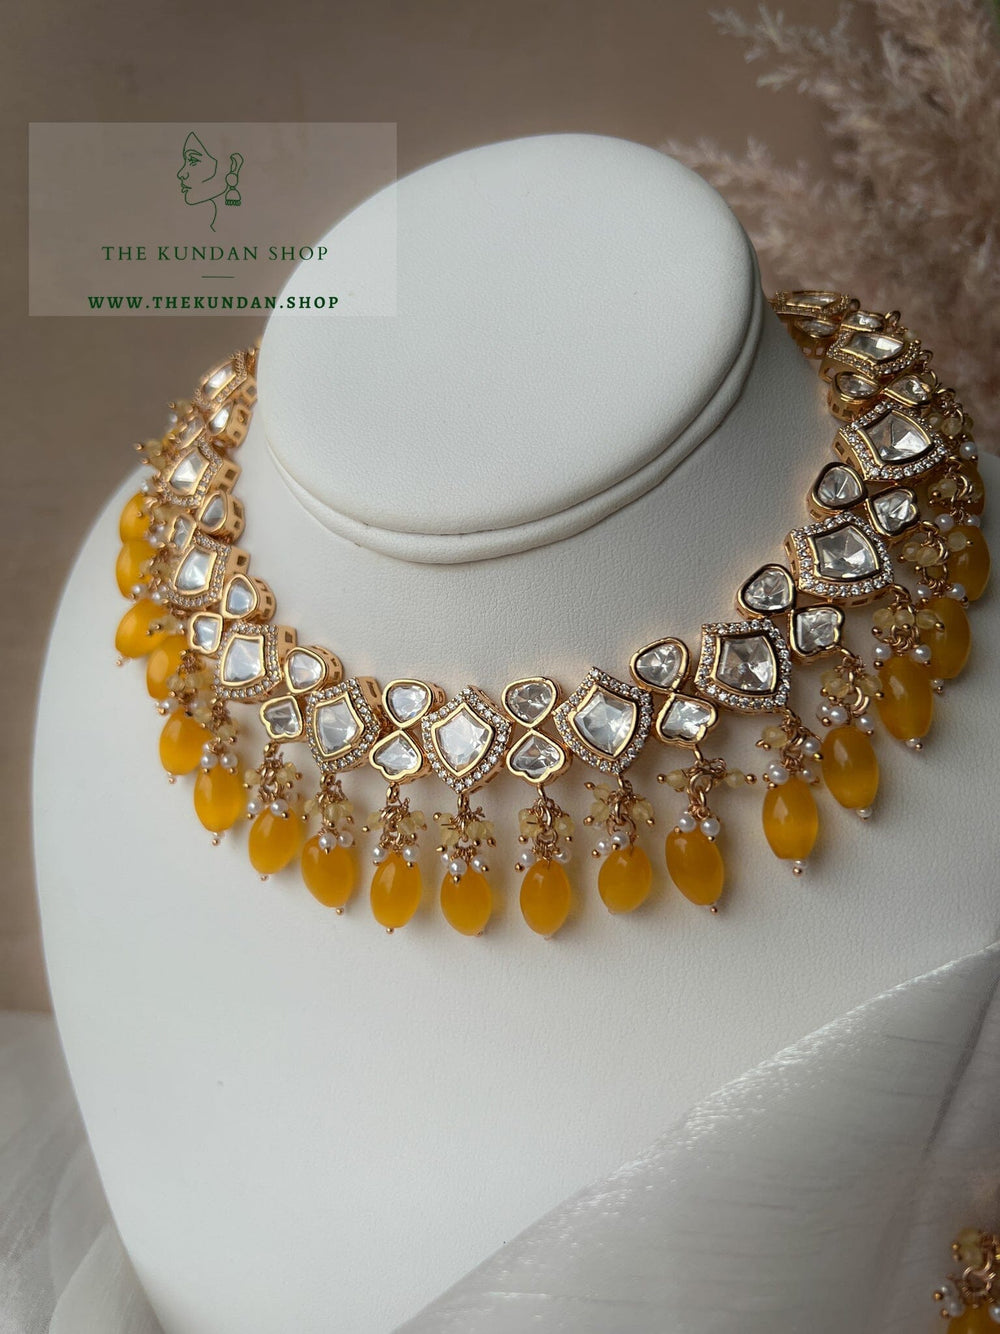 Little Surprise in Yellow Necklace Sets THE KUNDAN SHOP 